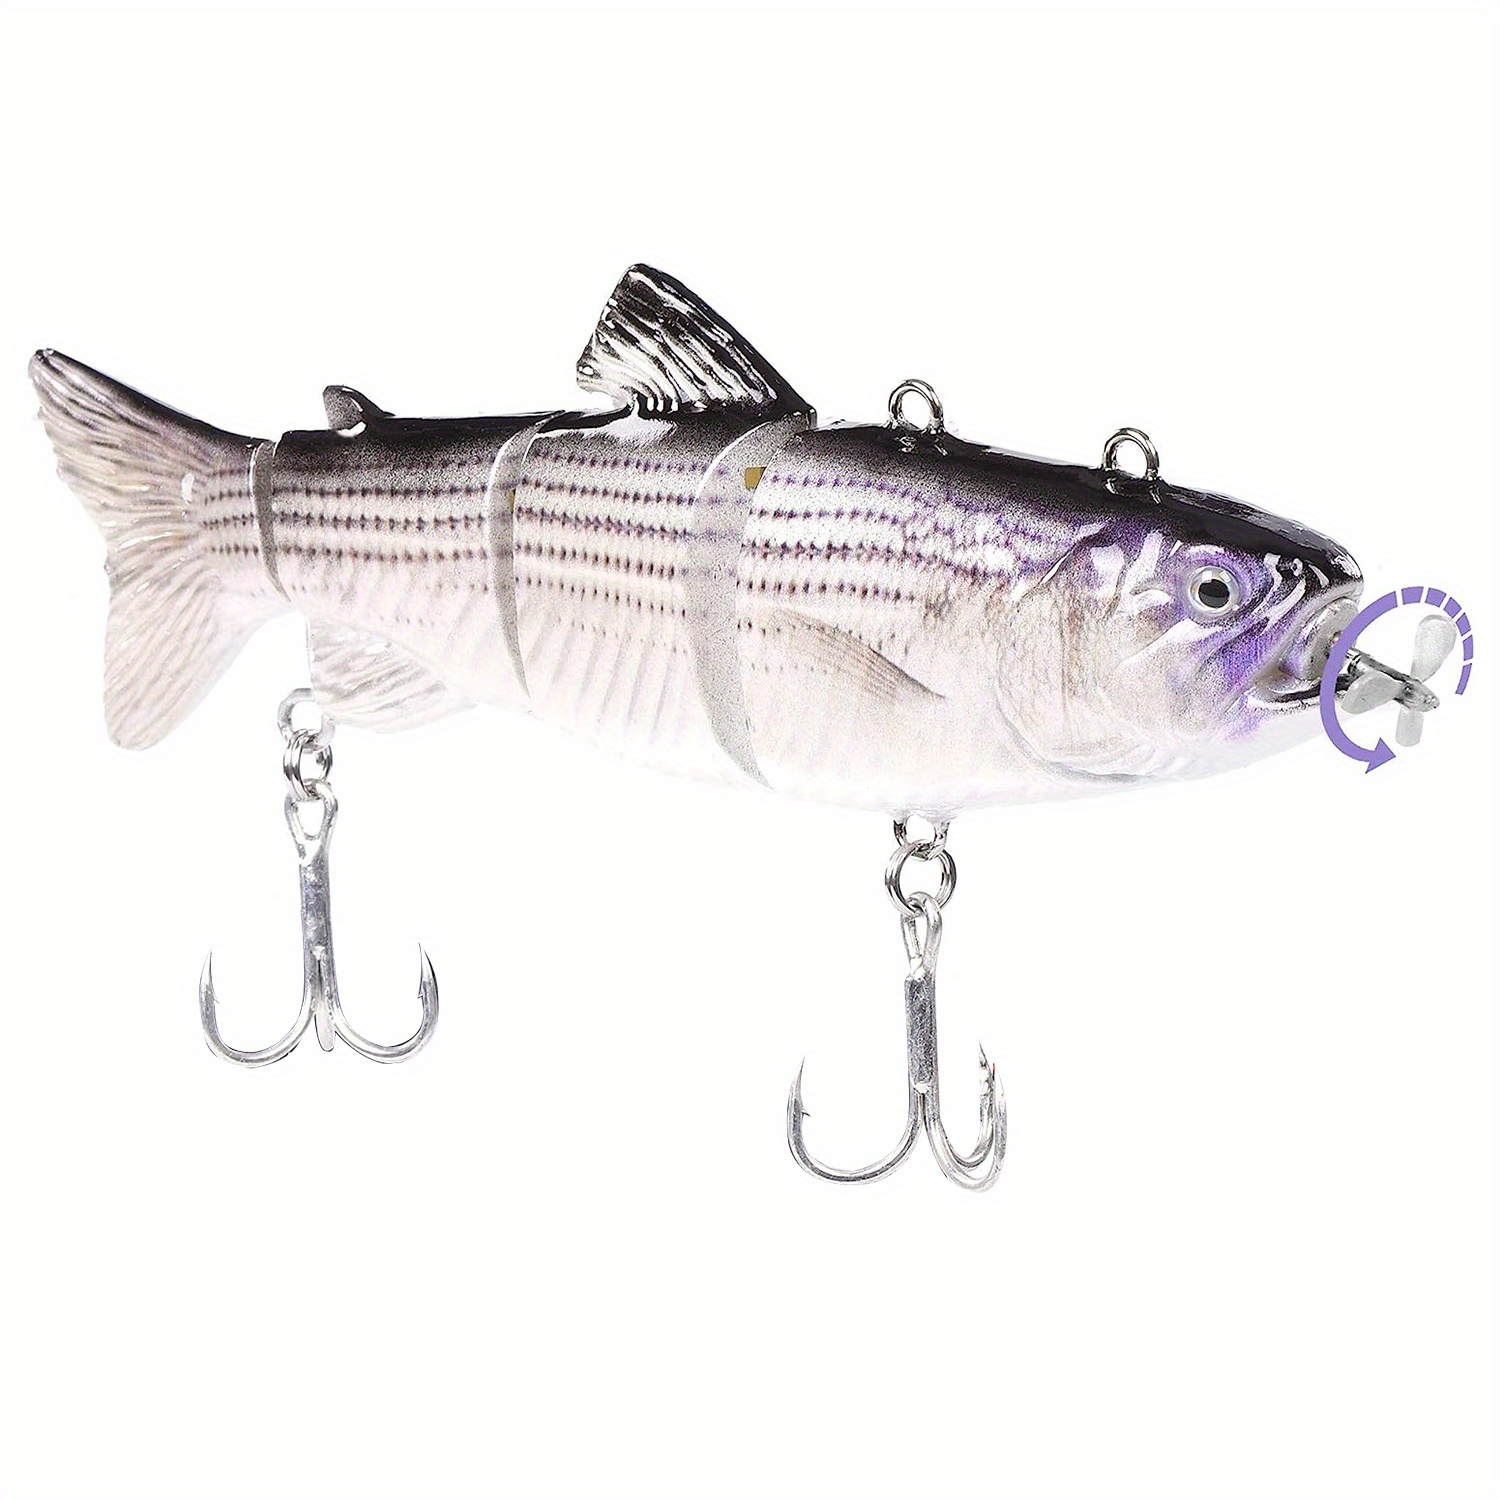 Robot Fishing Lure! - swims like real live bait 